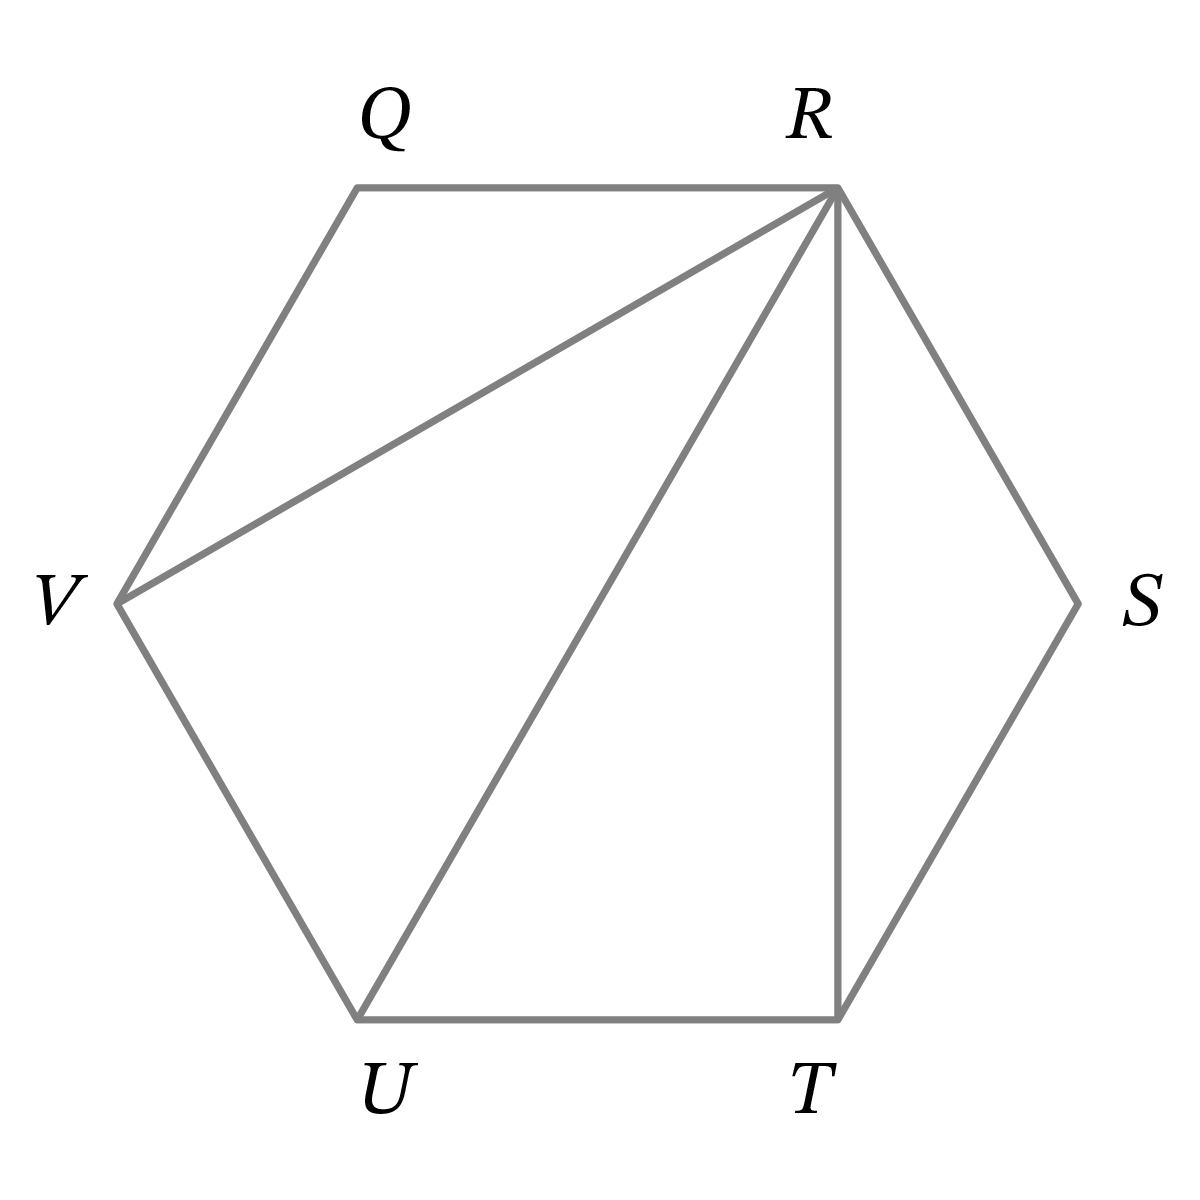 regular hexagon with inscribed triangles